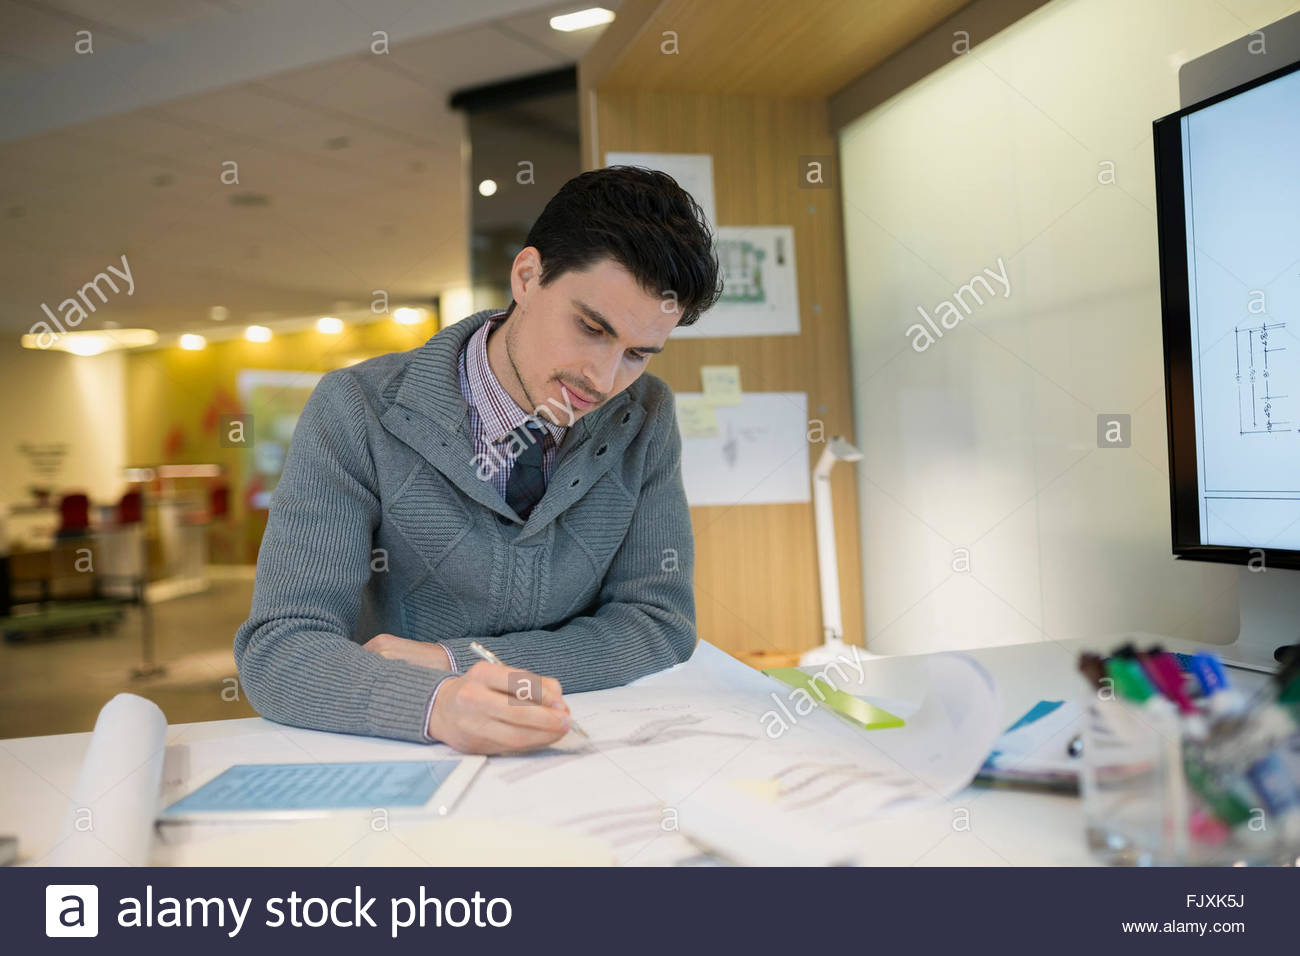 Architect drafting plans at office desk Stock Photo